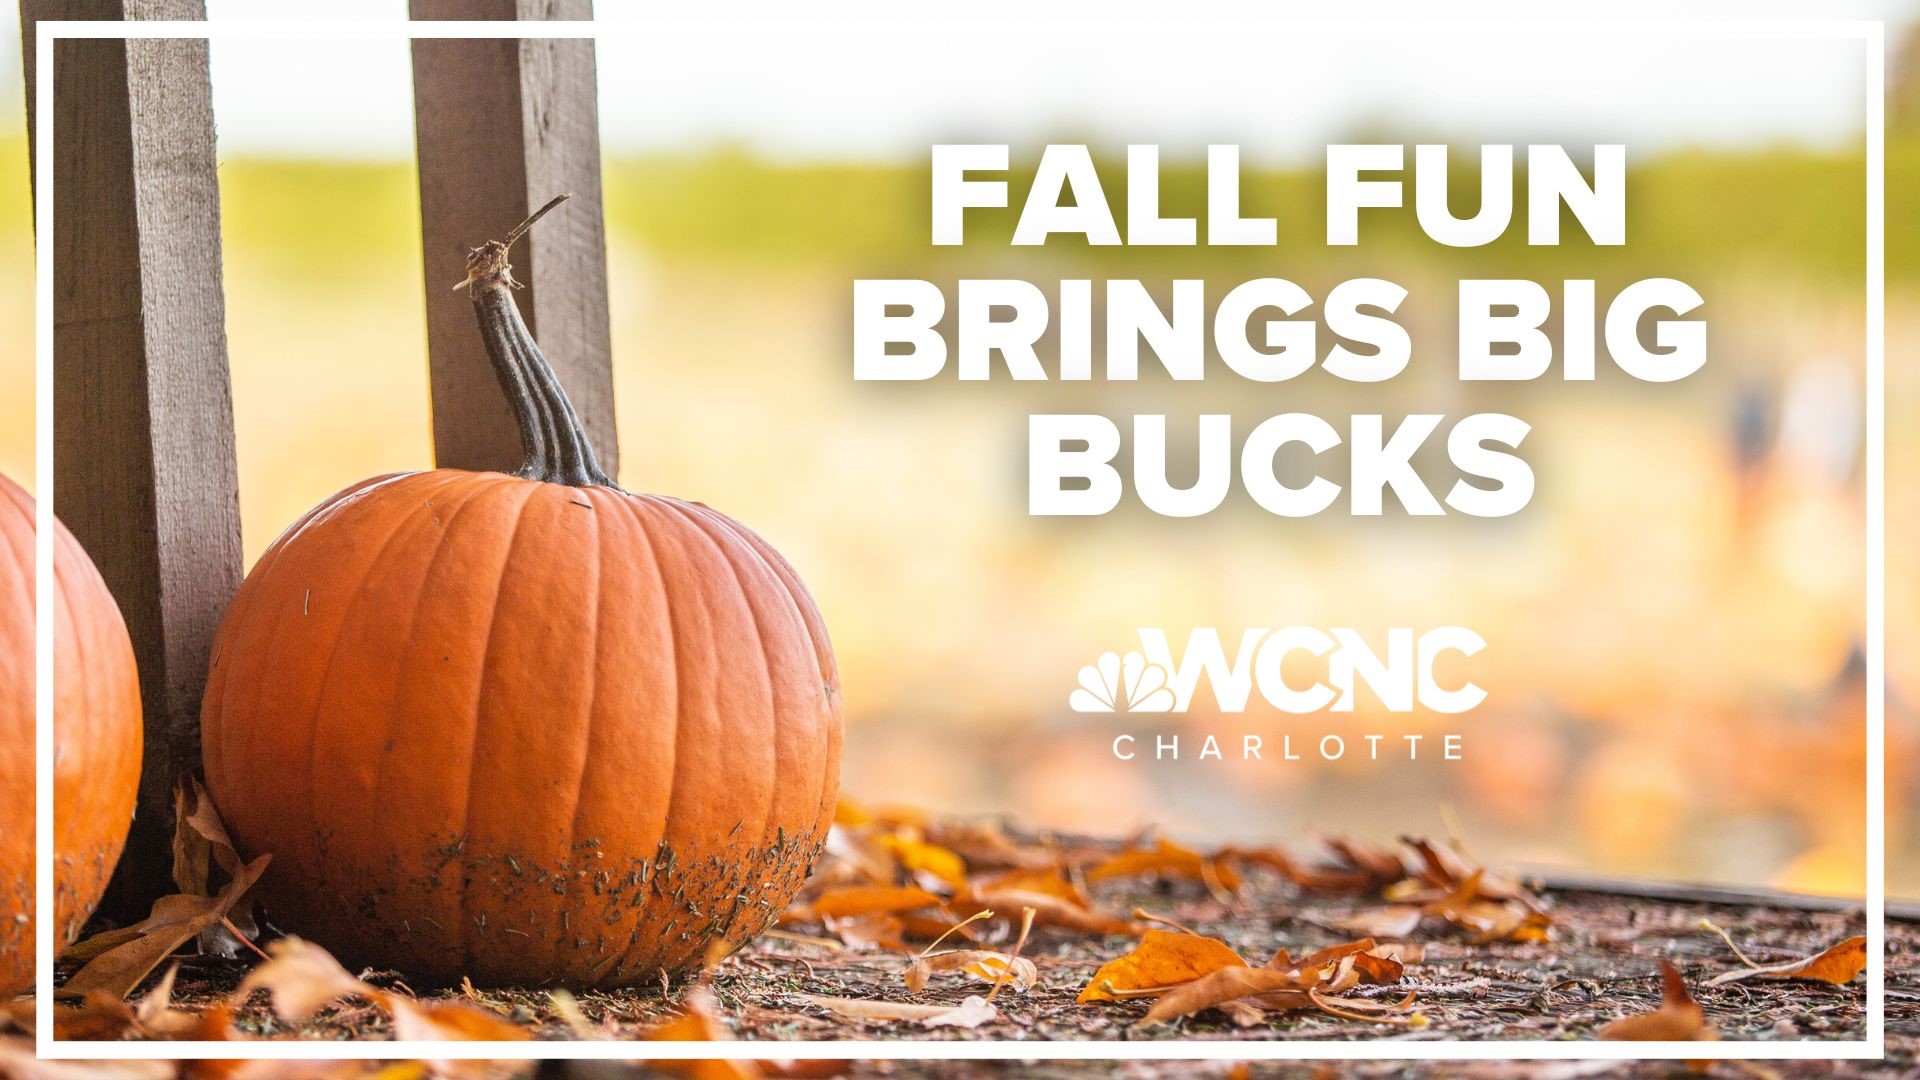 have a wonderful fall weekend